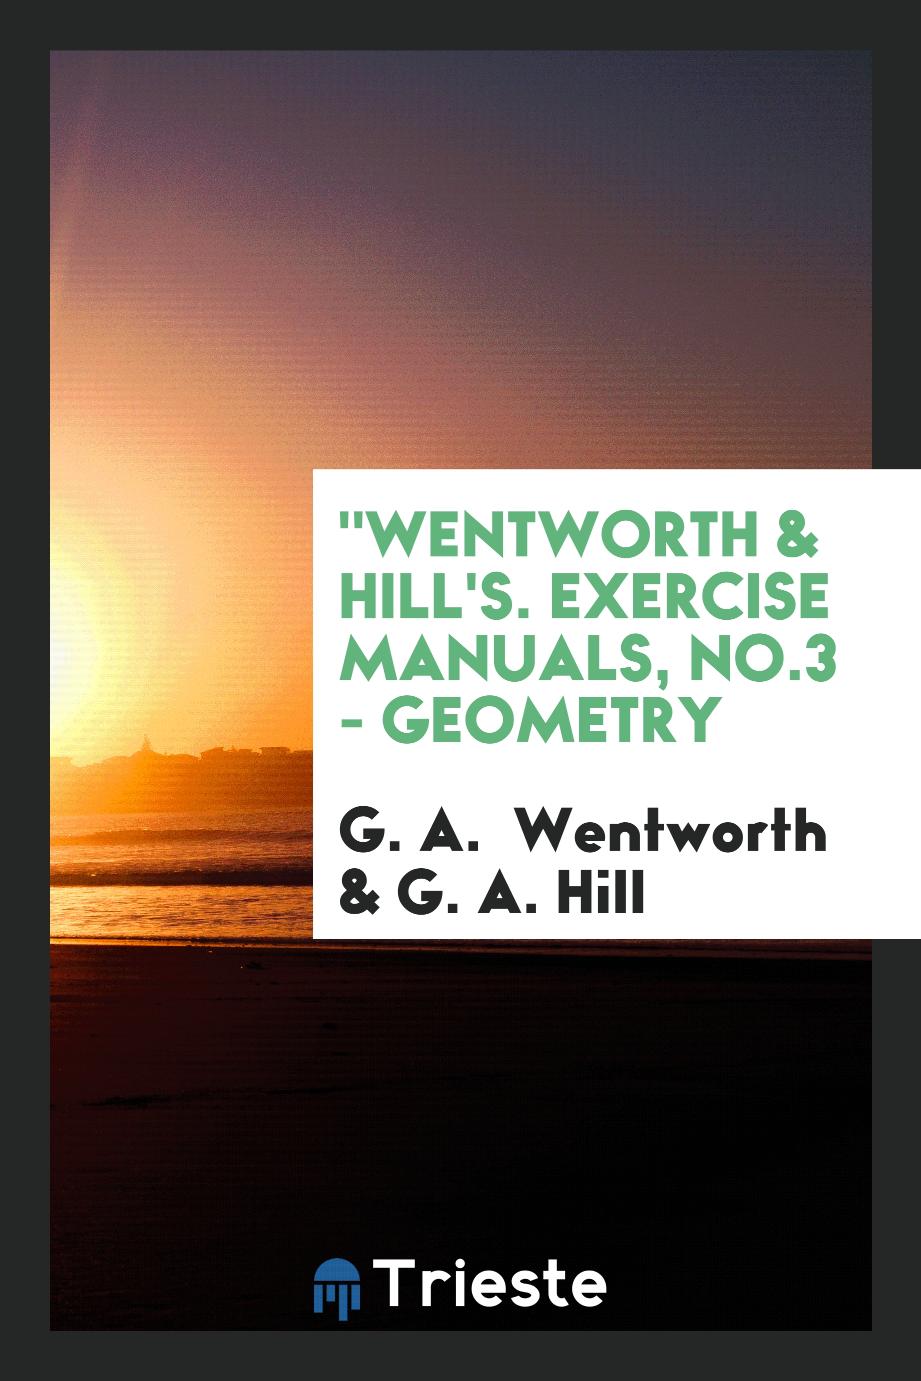 "Wentworth & Hill's. Exercise Manuals, No.3 - Geometry